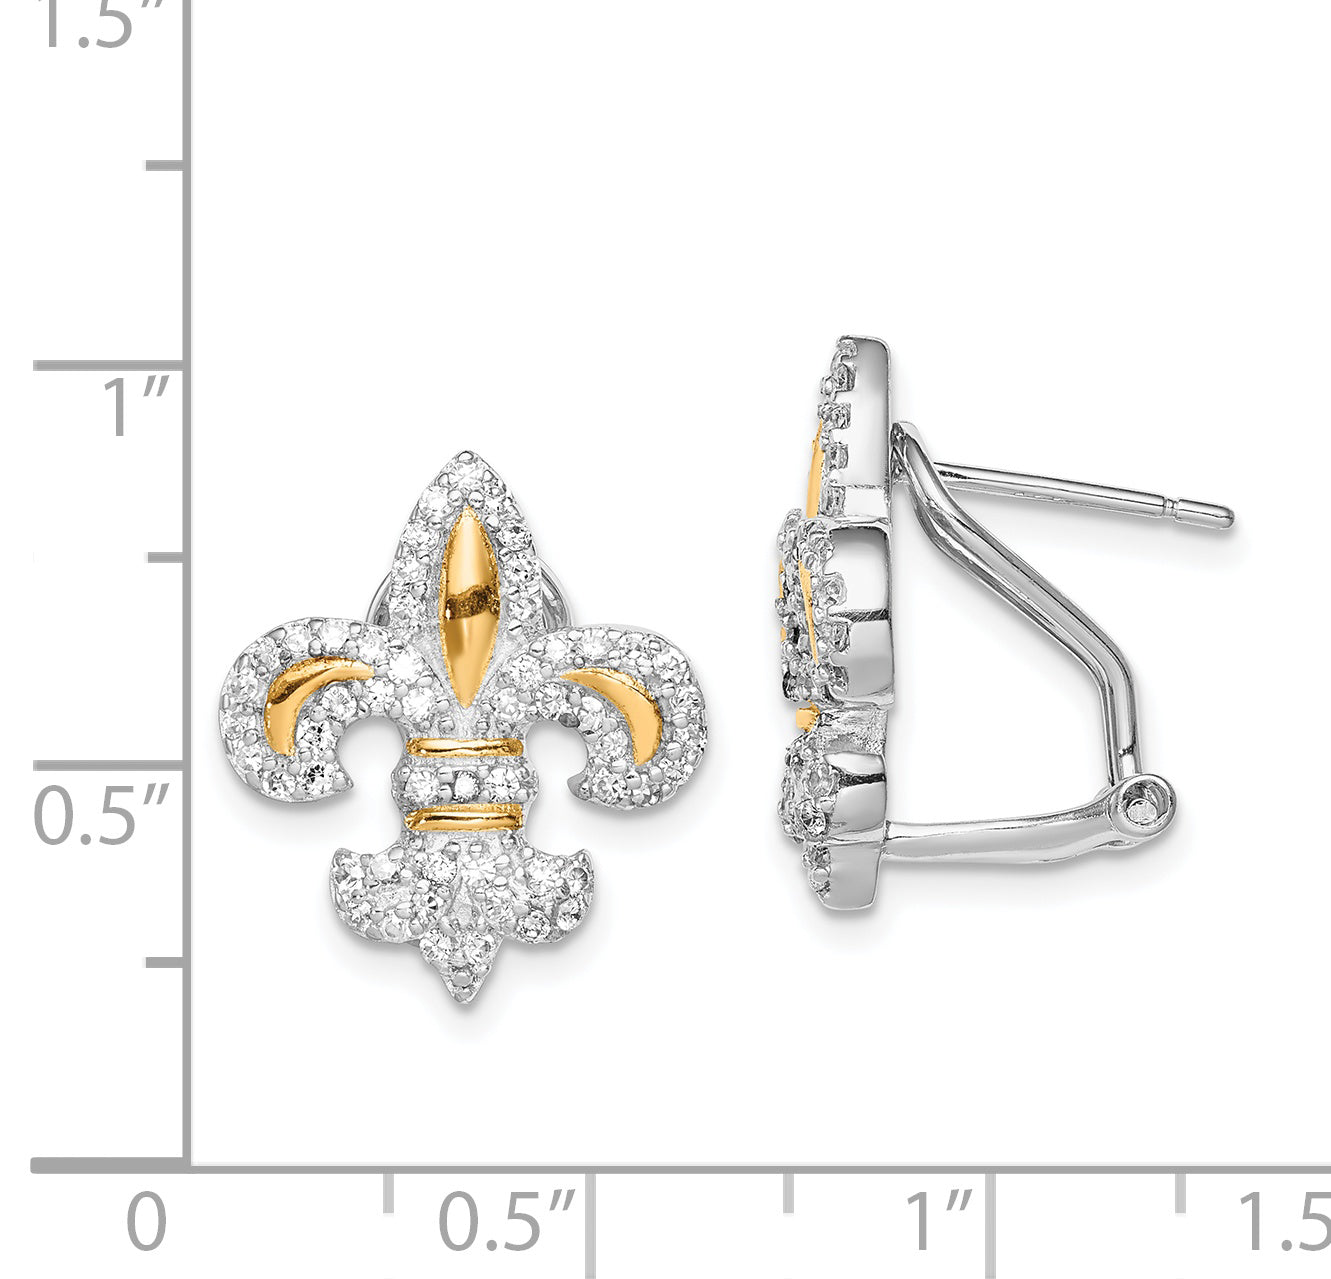 Sterling Silver Rhodium-plated with Gold Tone Vermeil CZ Fleur de Lis Omega Back Earrings